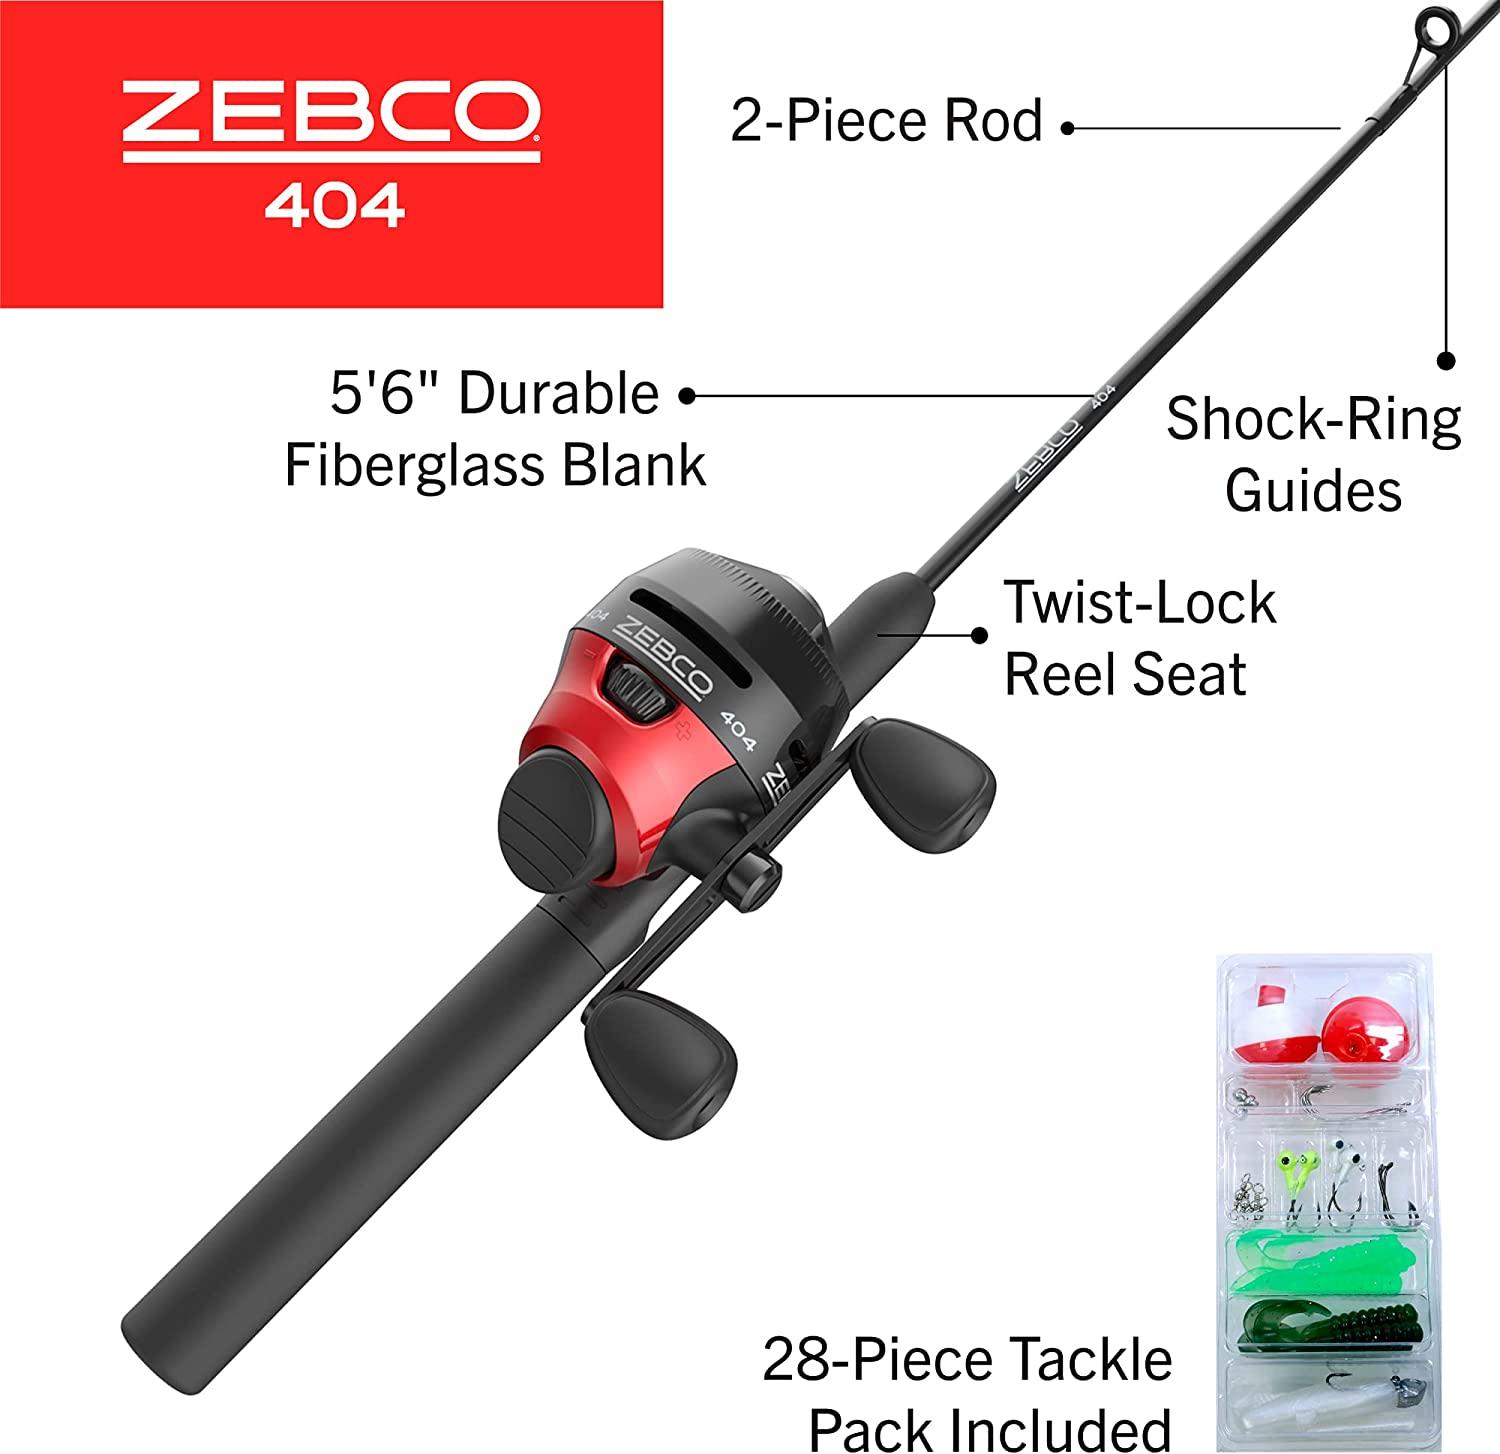 Zebco 404 Spincast Reel and 2-Piece Fishing Rod Combo Durable Fiberglass Rod  with EVA Handle QuickSet Anti-Reverse Reel with Built-In Bite Alert  Pre-Spooled 56 Rod - With 28pc Tackle